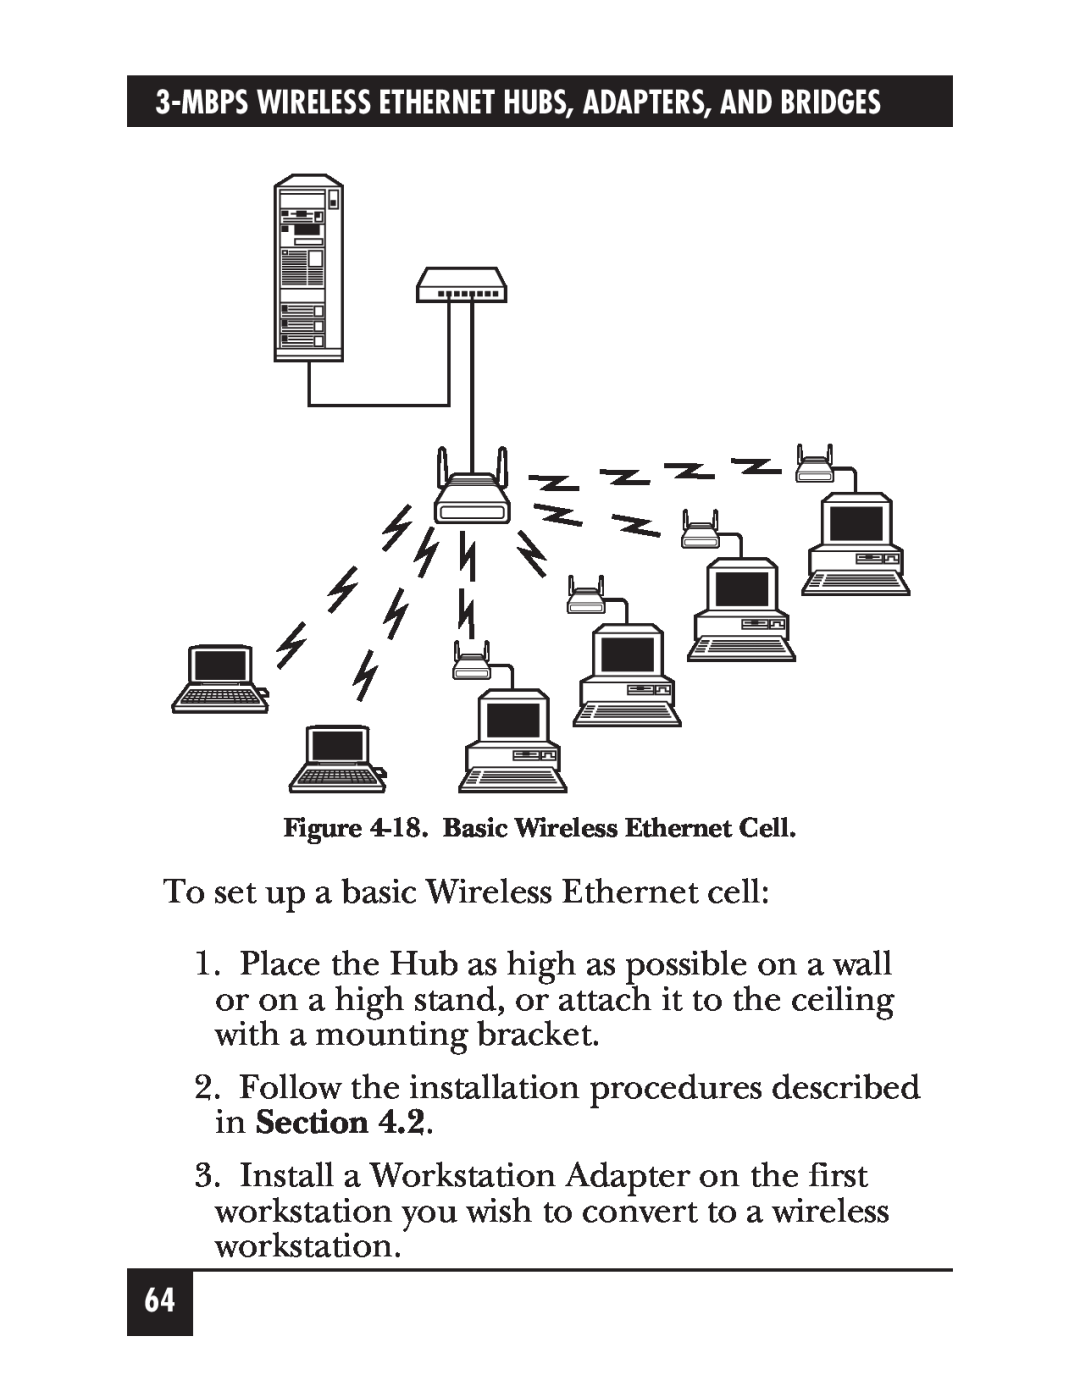 Black Box LW012AE, LW011AE, LW008A, LW005A, LW009A, LW003A, LW002A, LW004A, LW007A manual To set up a basic Wireless Ethernet cell 